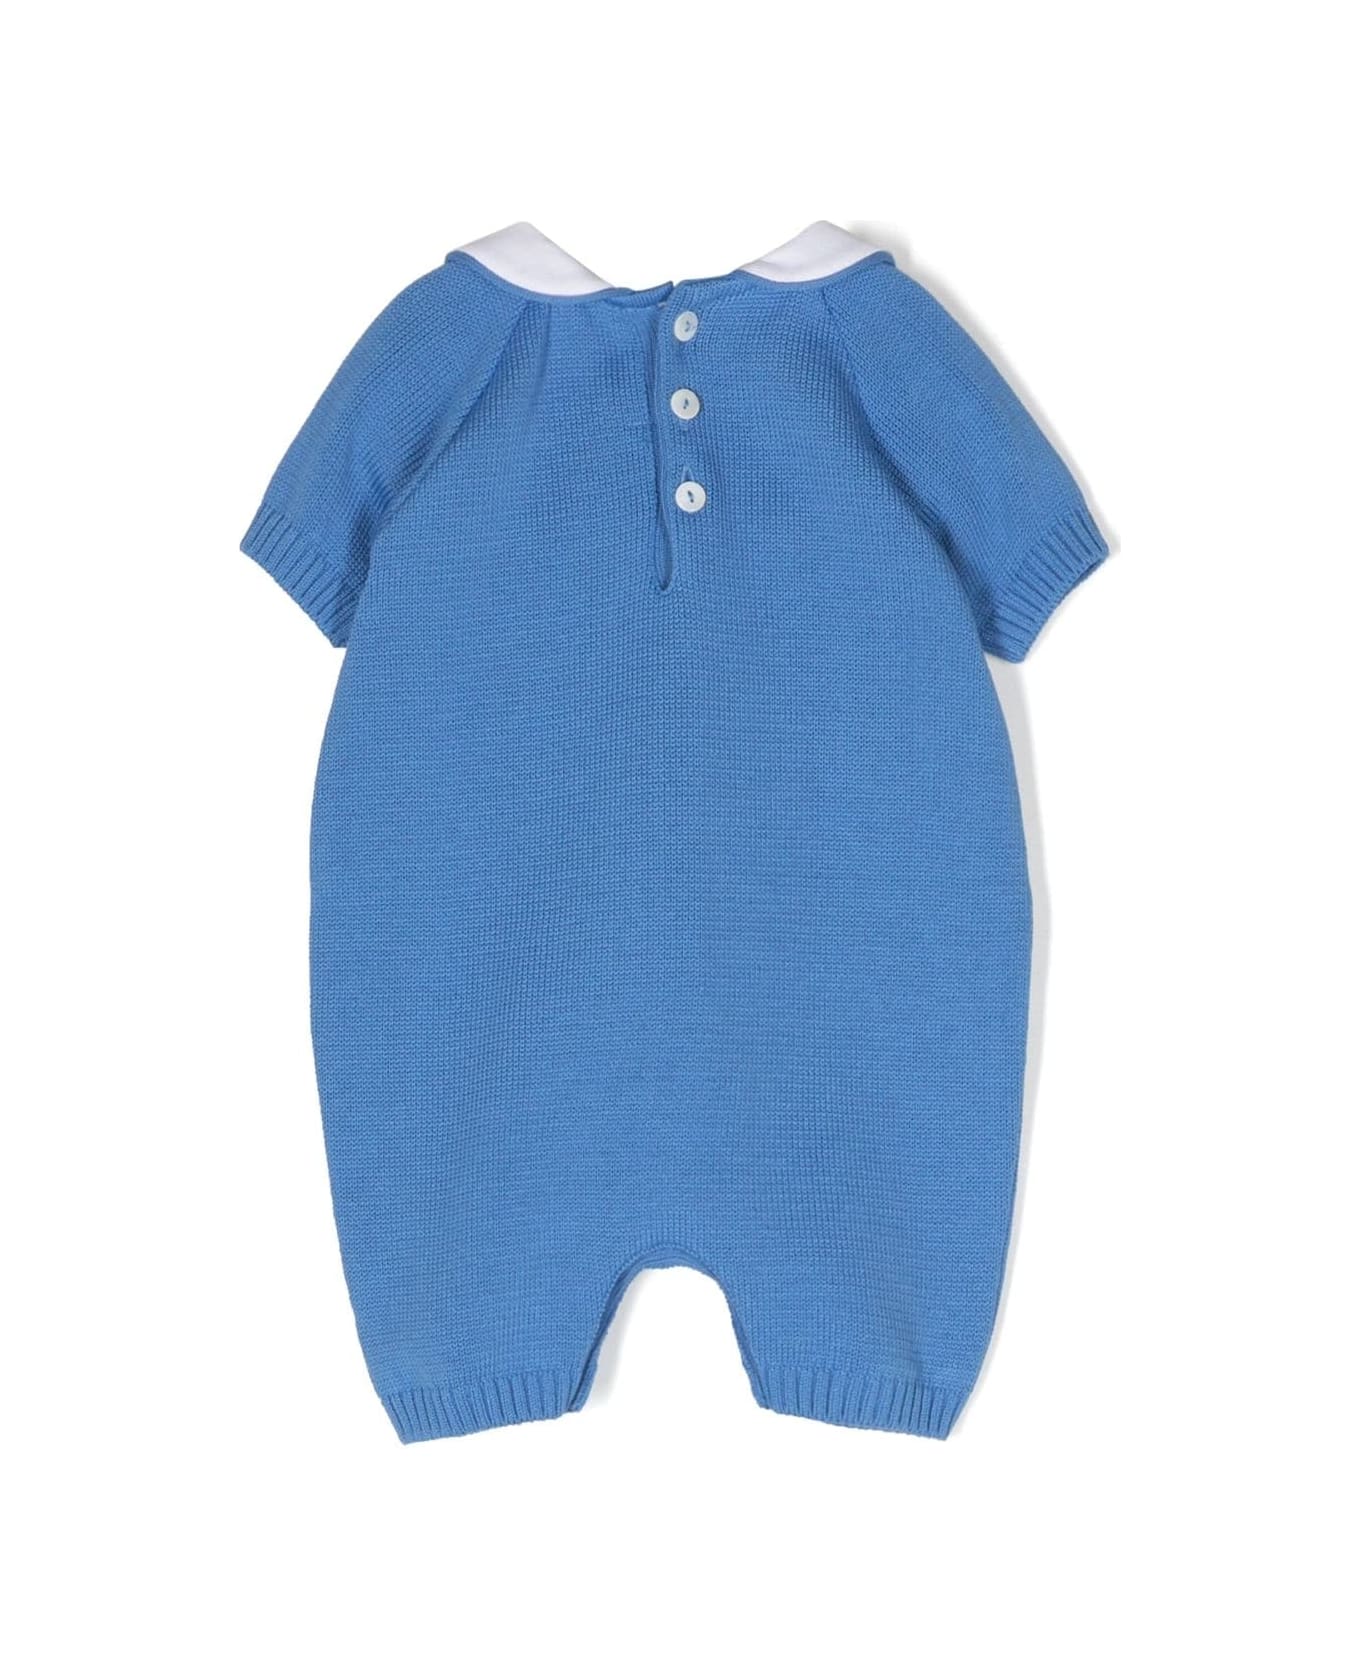 Little Bear Onesie With Embroidery - Light blue